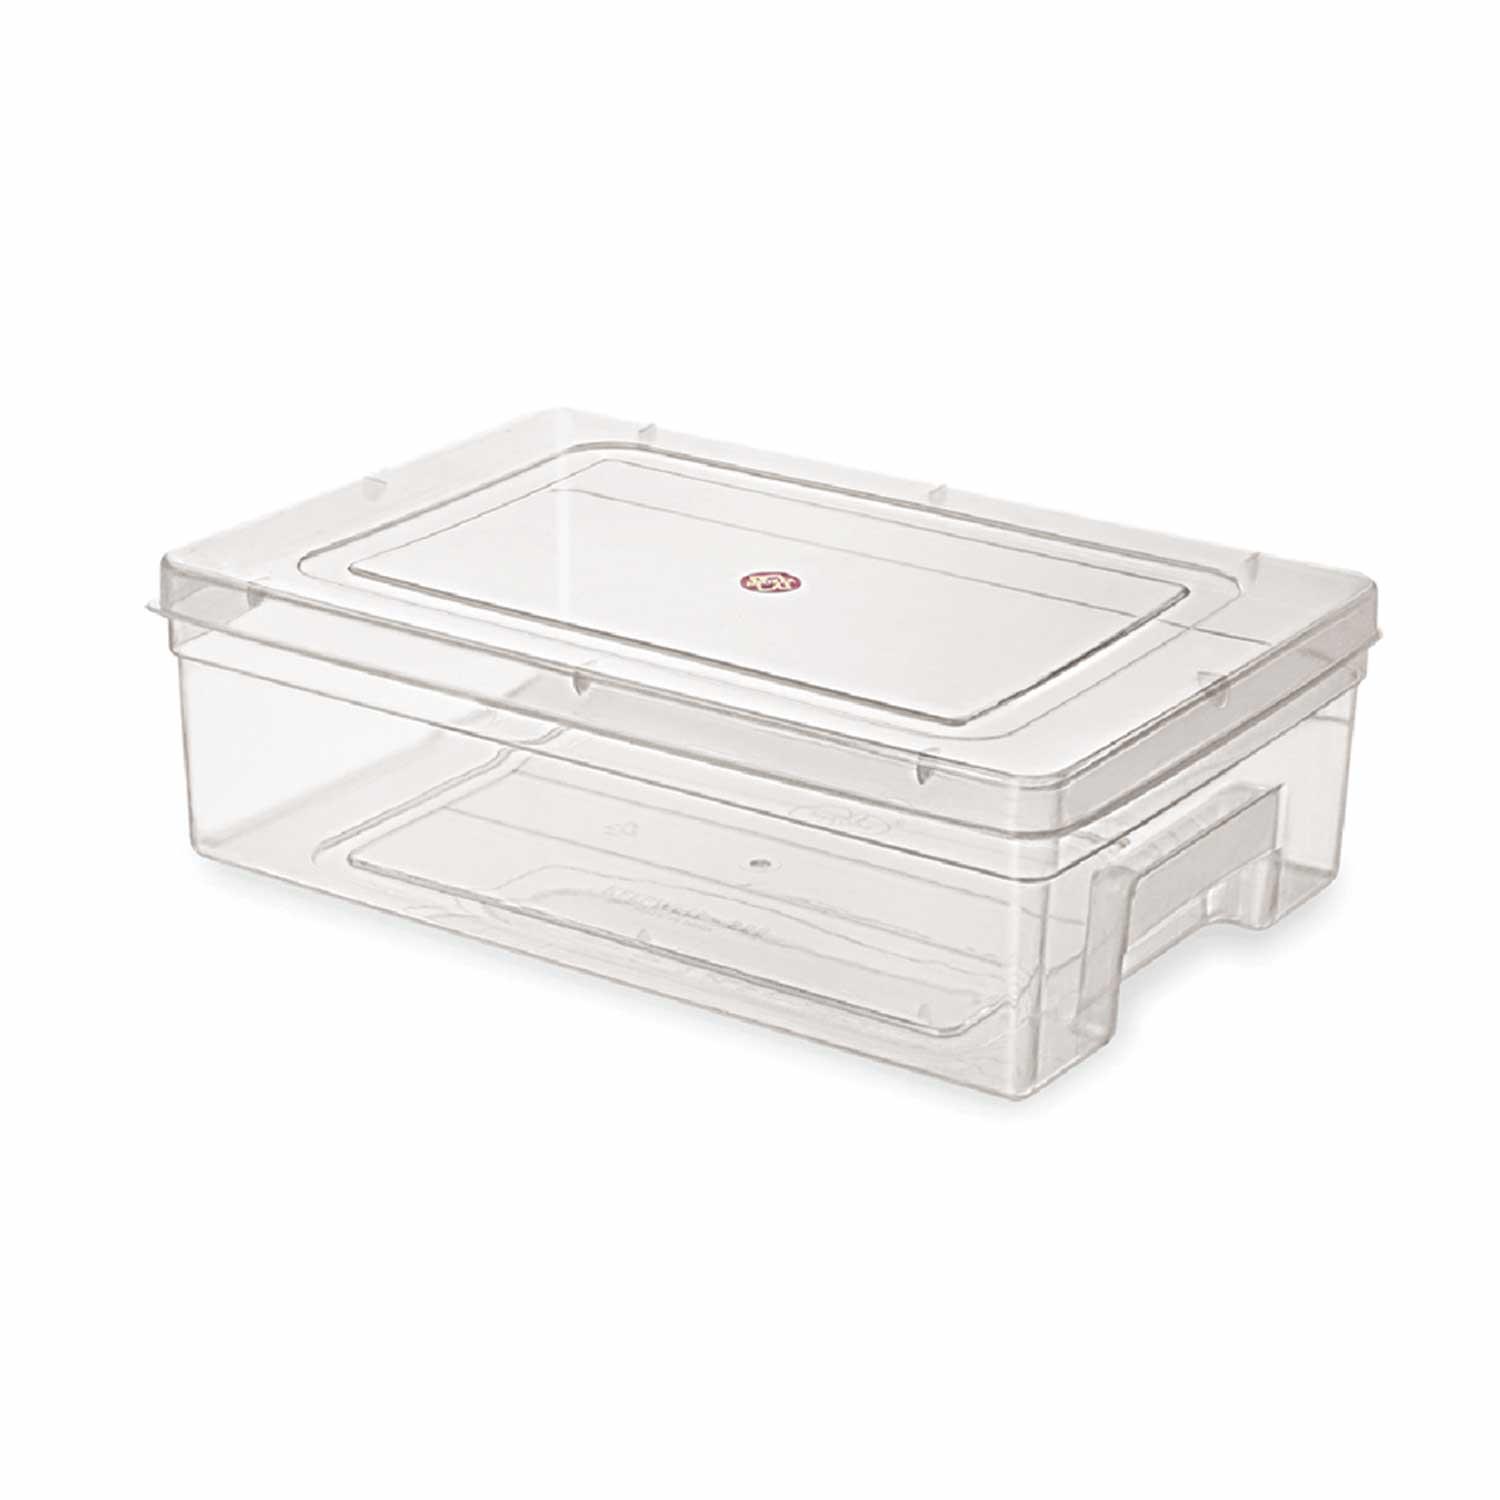 NAKODA KEEP SUPER 222 CONTAINER 1PC